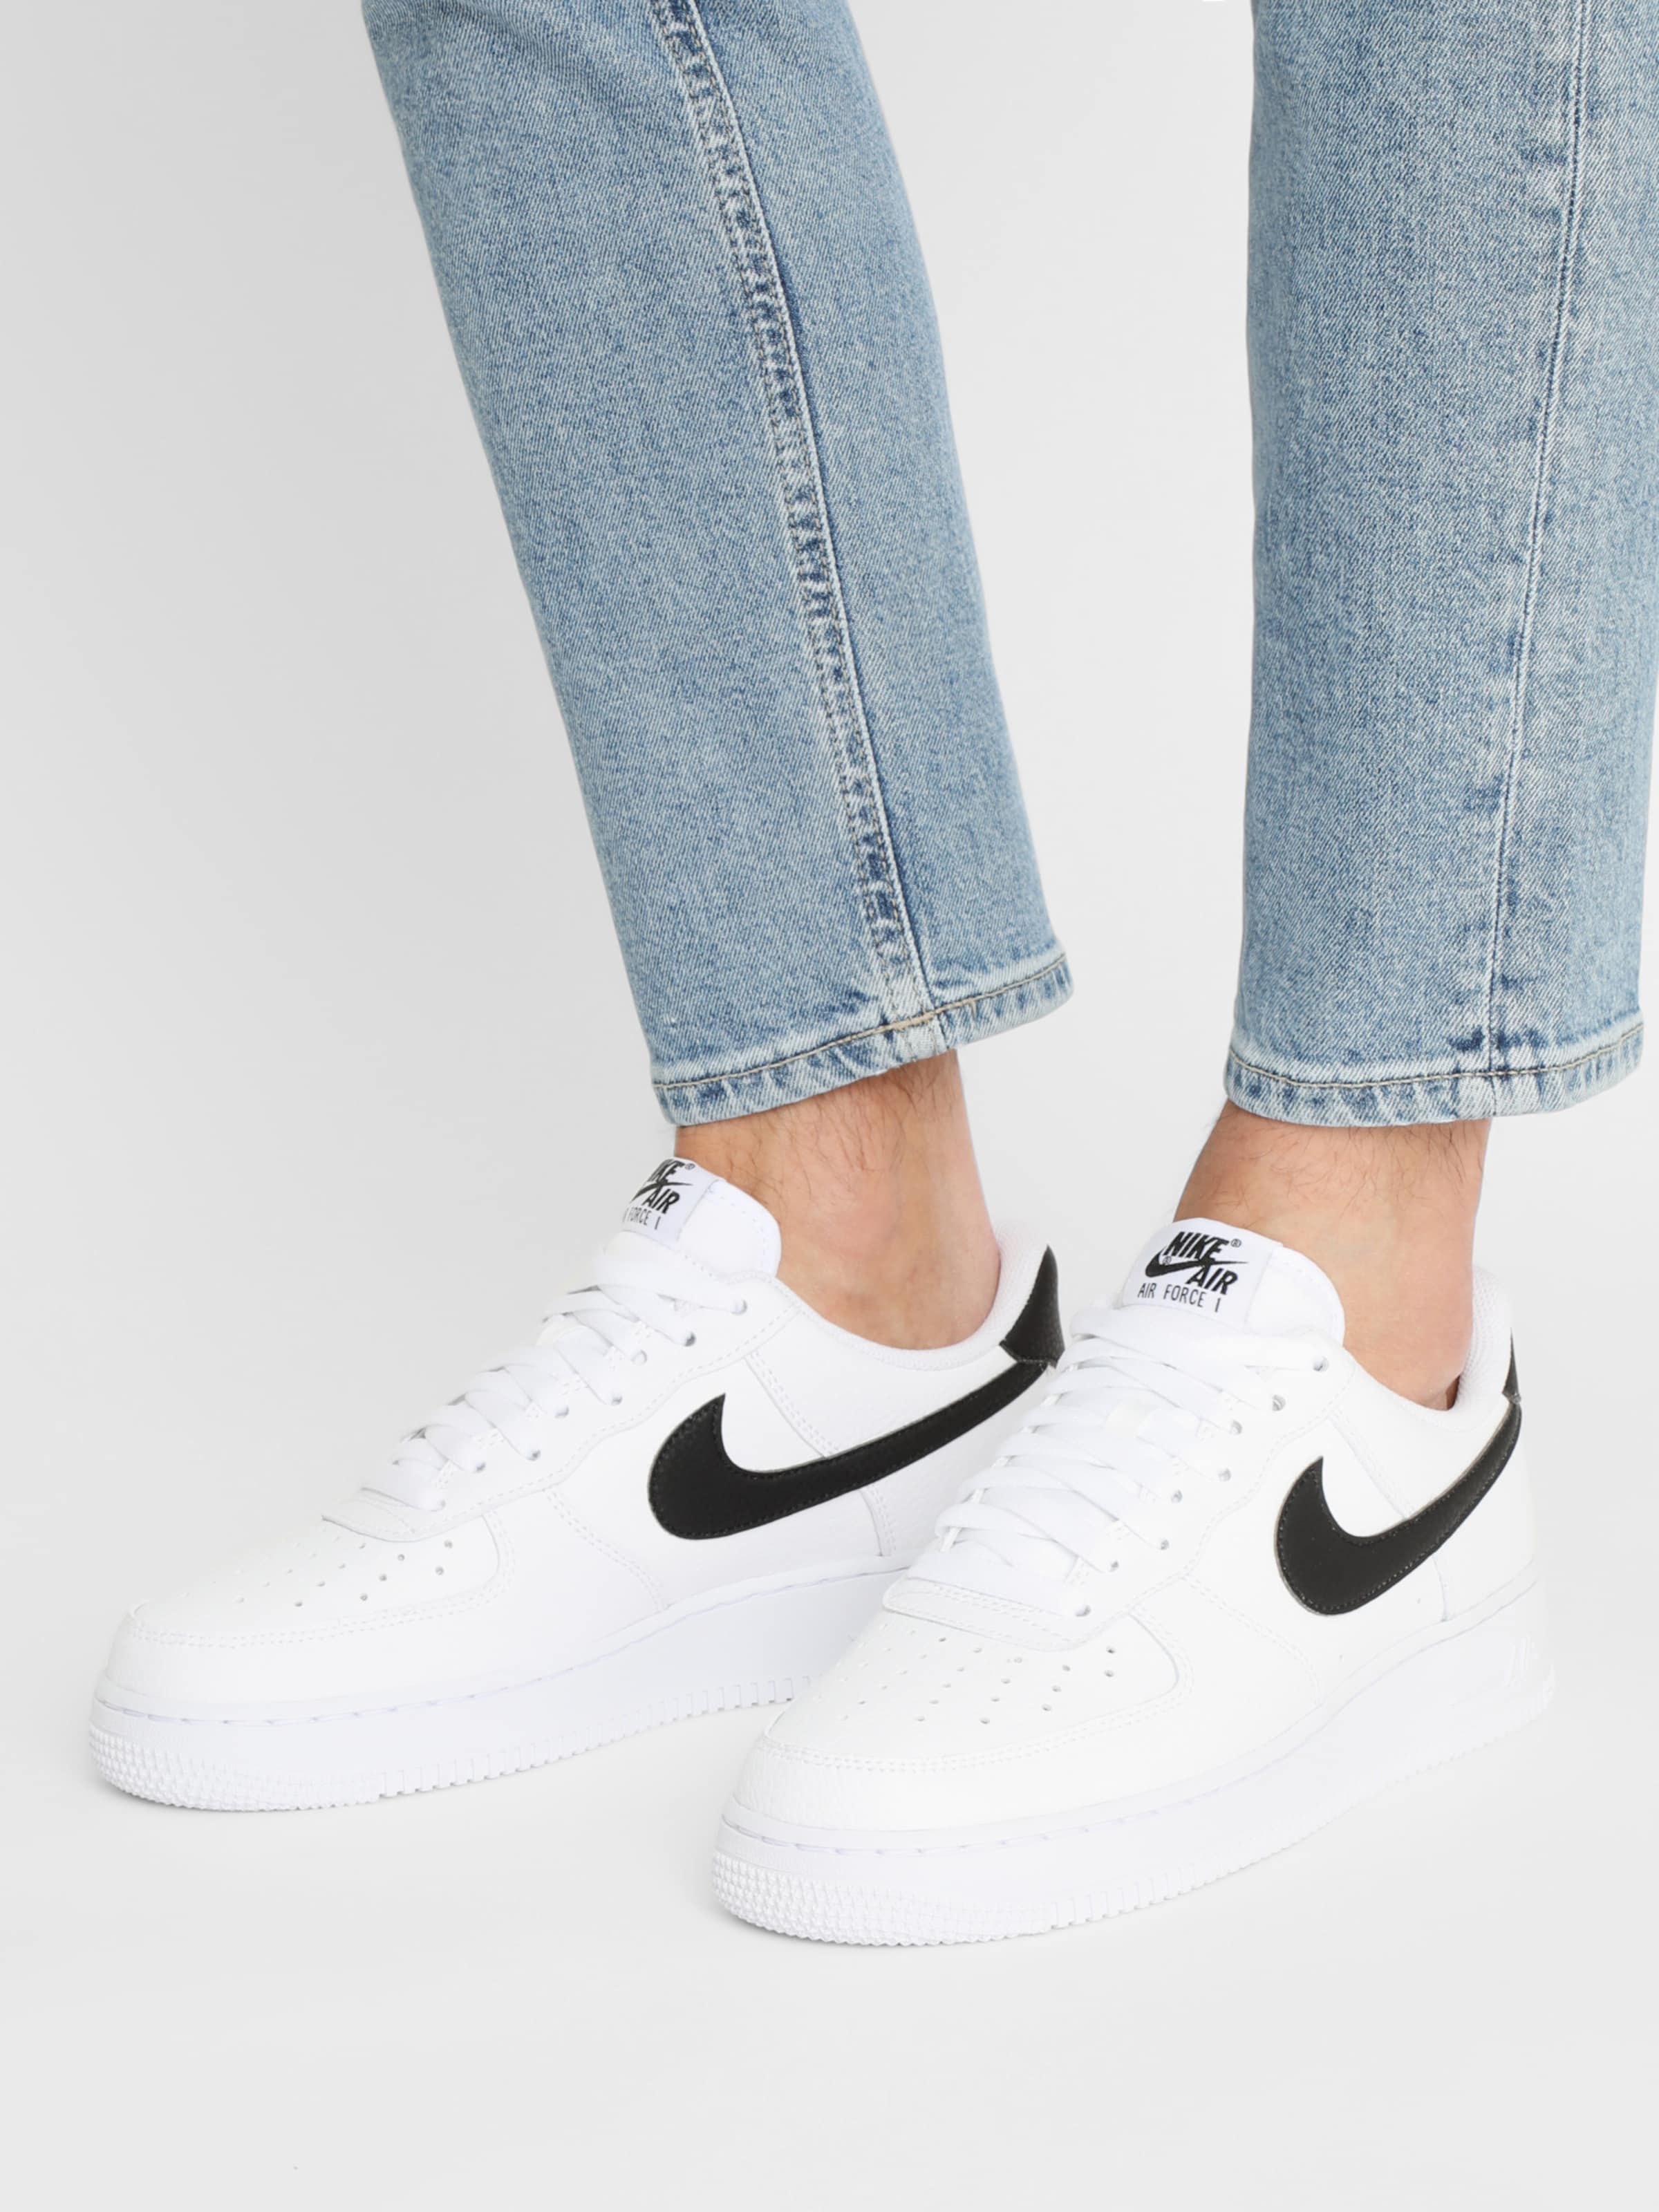 uitbarsting opleggen Geroosterd air force 1 about you